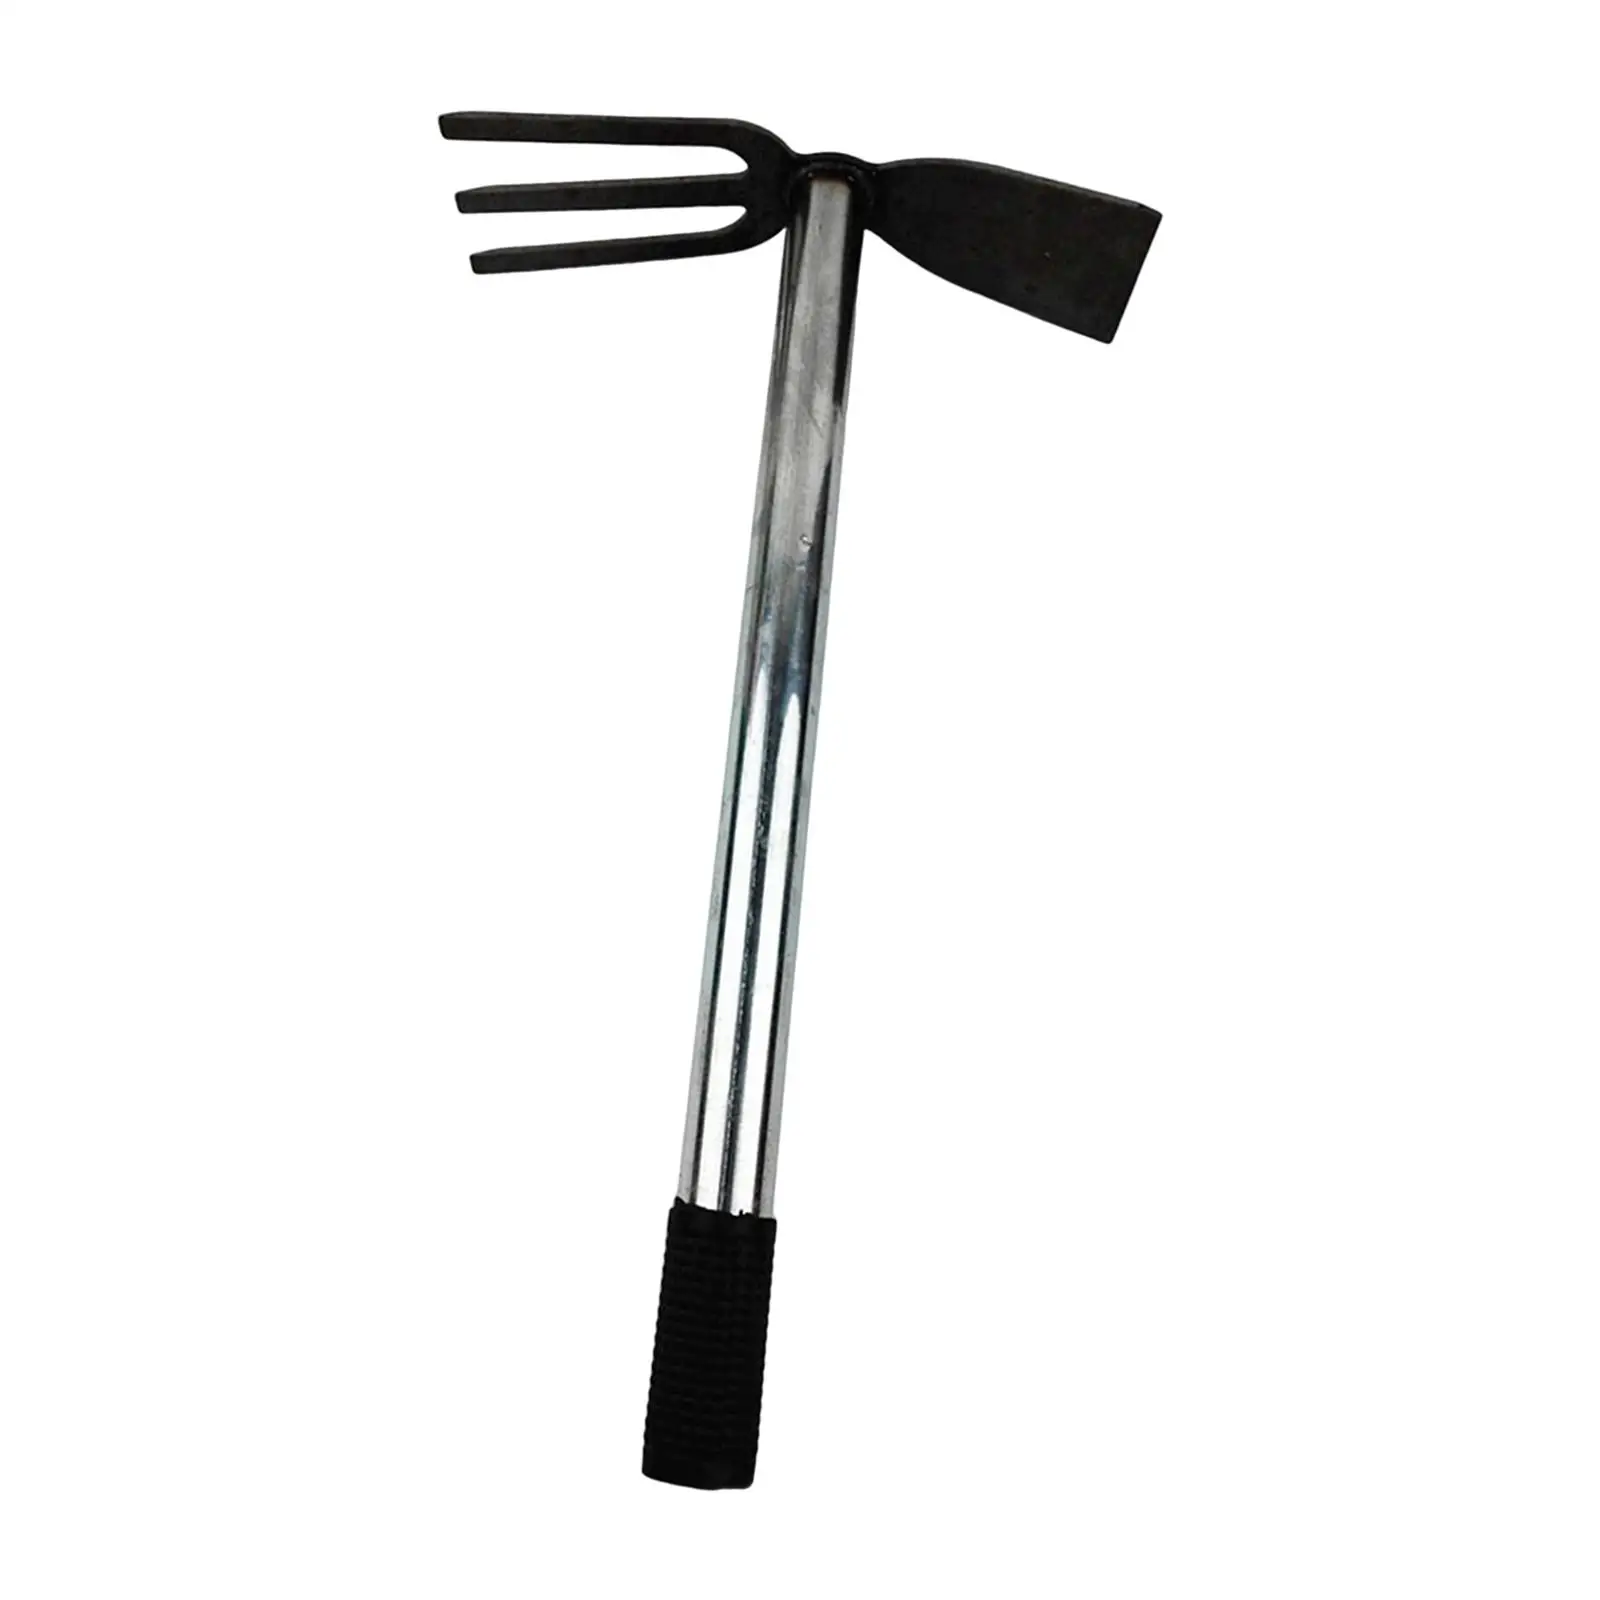 

Garden Hoe Wedding Gardening Hand Tool Short Nonslip Handle Hand Digger Cultivator for Agriculture Edging Planing Equal Digging